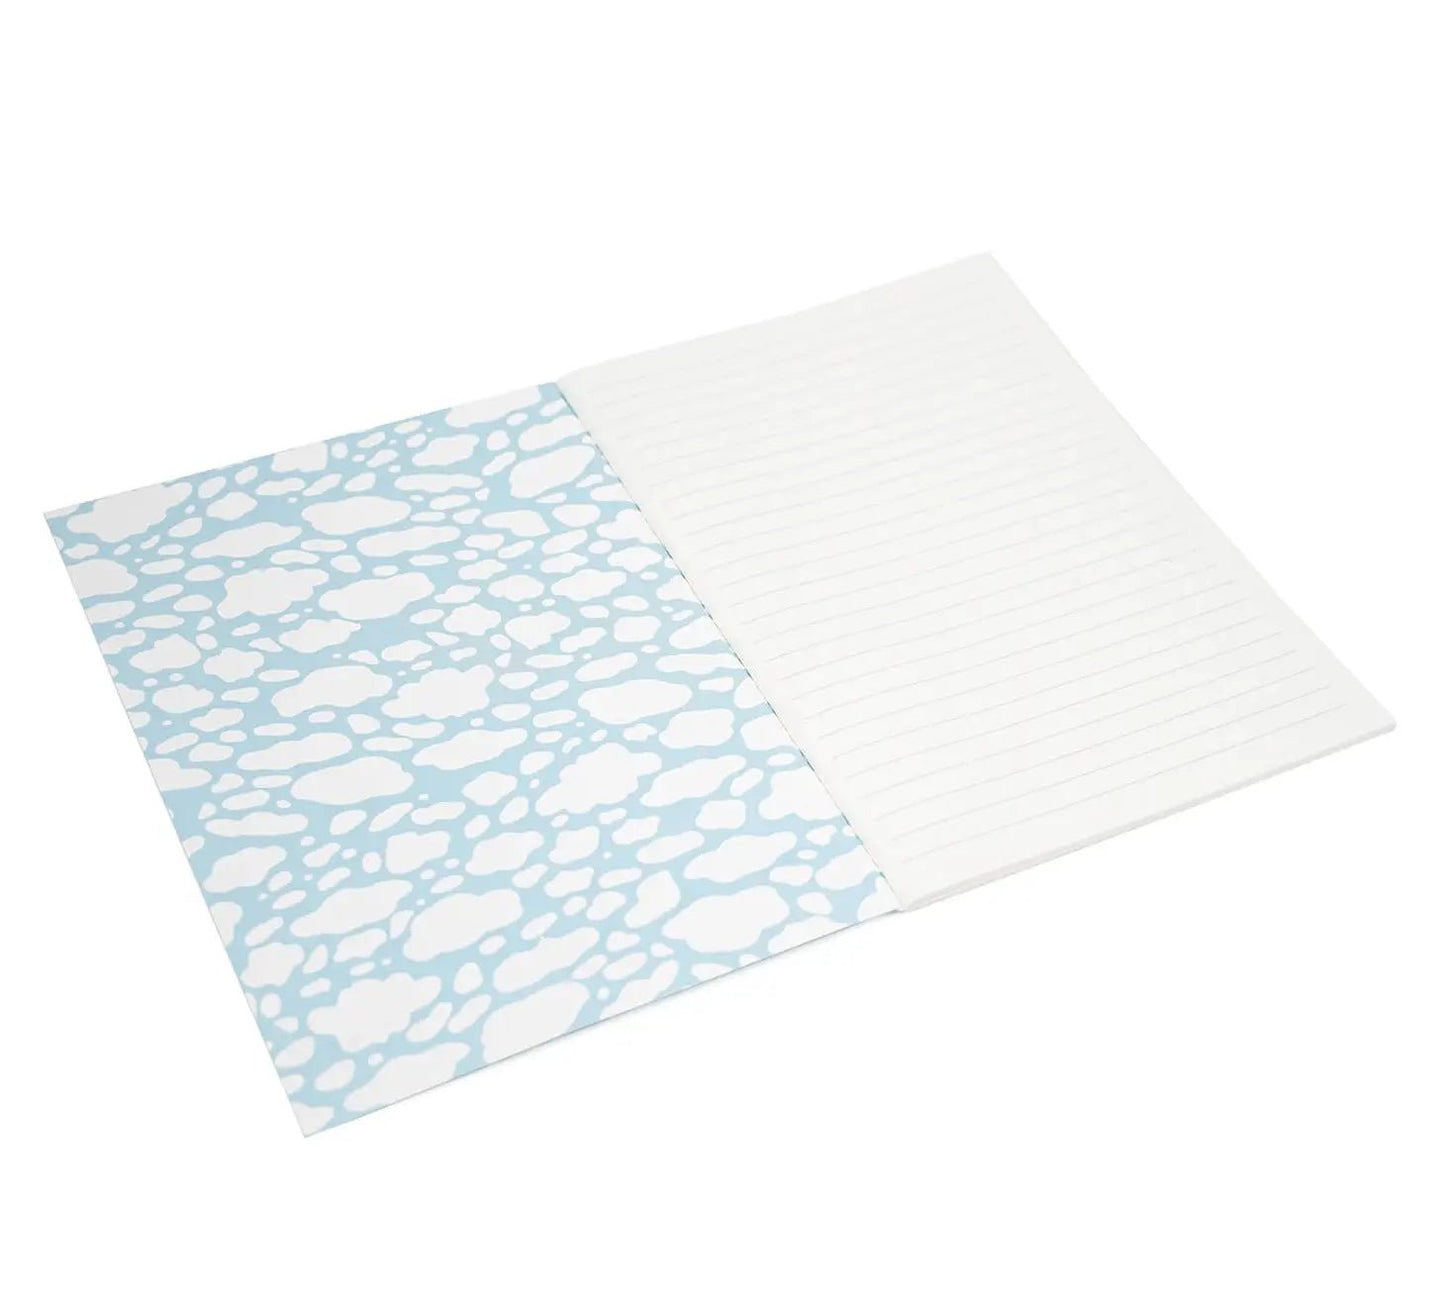 Lined Blue notebook w/ airplane drawing. Journaling for mind, body, & spirit well-being.